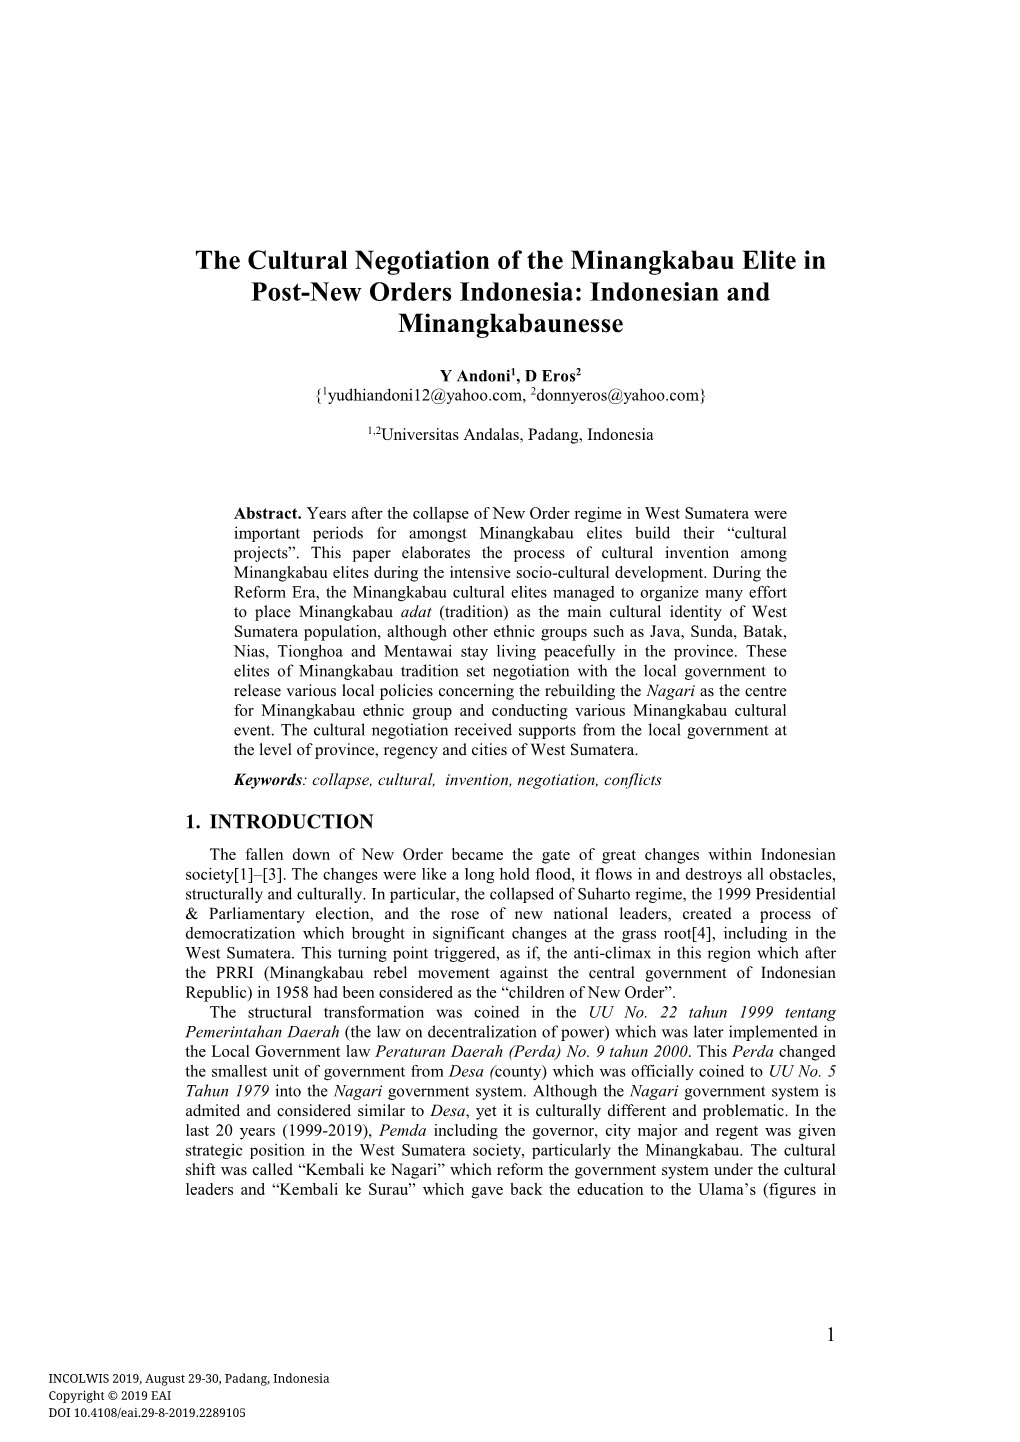 The Cultural Negotiation of the Minangkabau Elite in Post-New Orders Indonesia: Indonesian and Minangkabaunesse